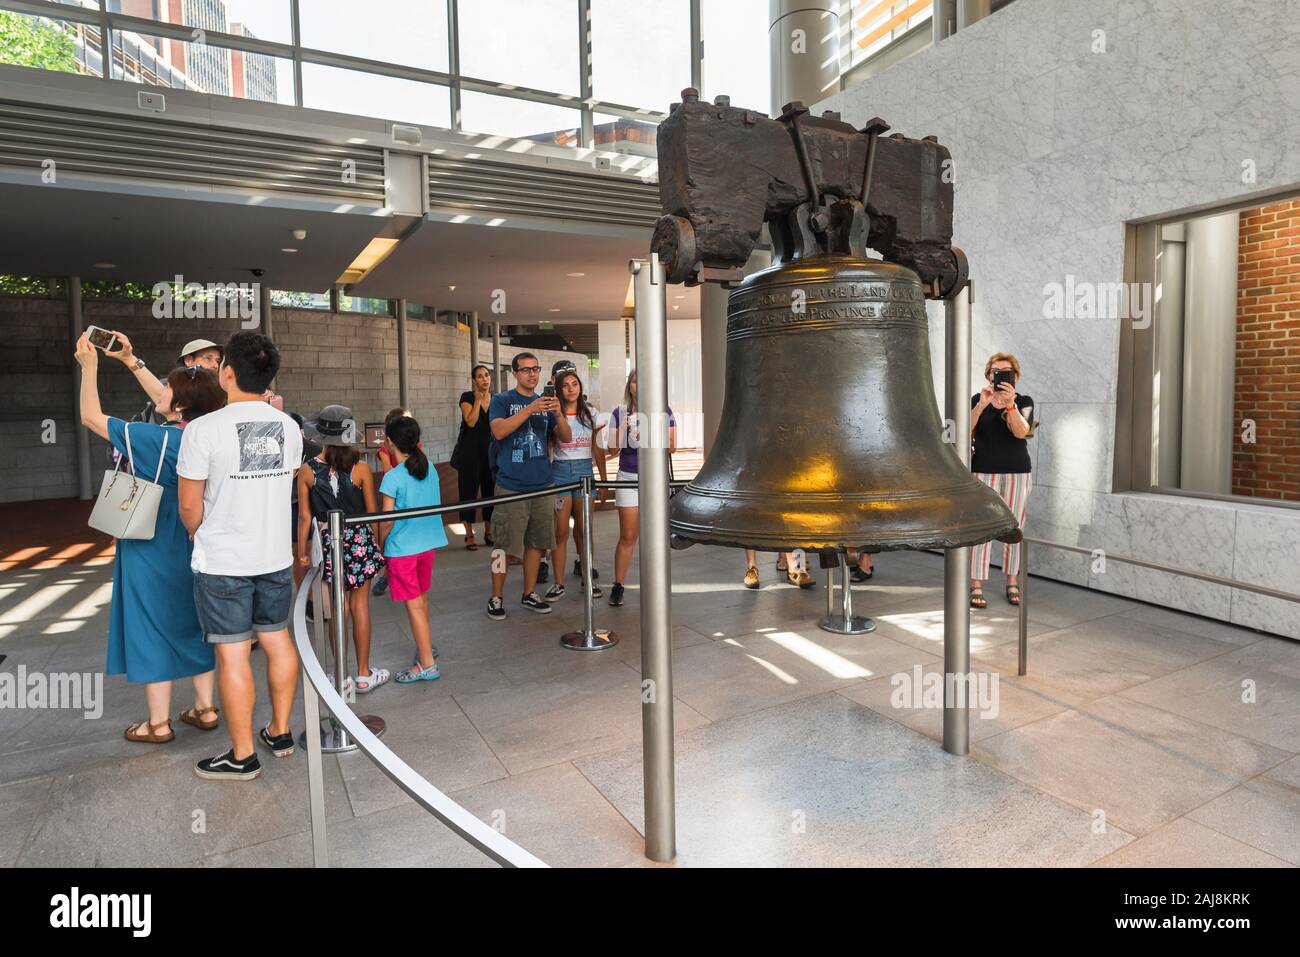 Philadelphia bell, view of visitors to the Liberty Bell Centre in Philadelphia taking photos of the famous bell, Pennsylvania, USA Stock Photo